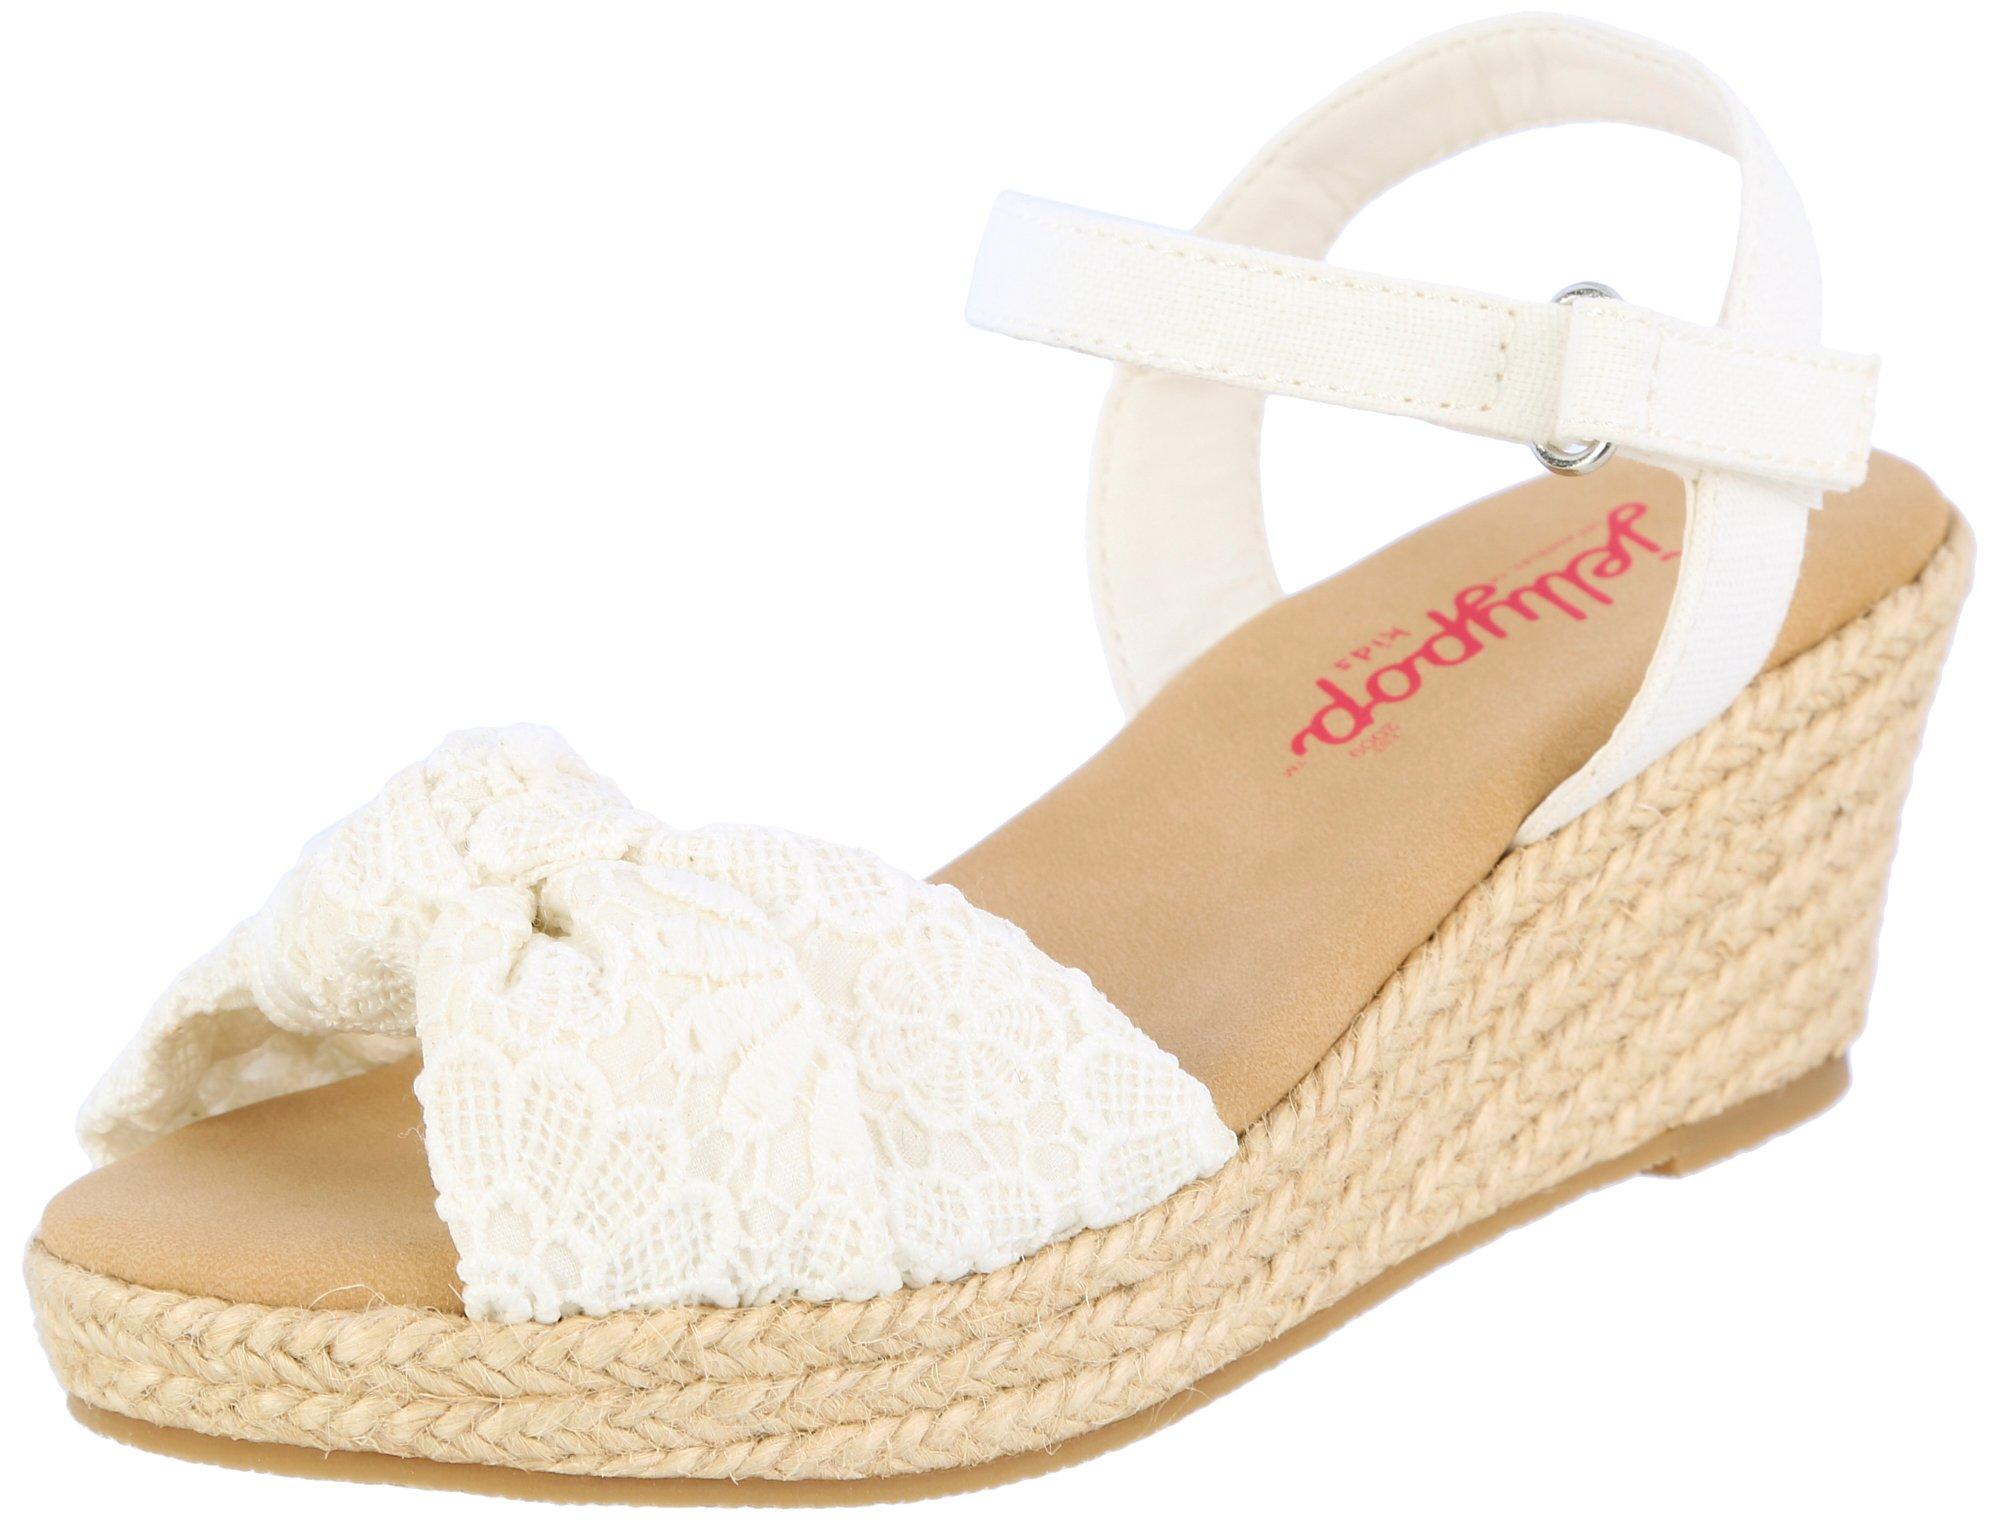 Jellypop Girls Excited Natural Sandals